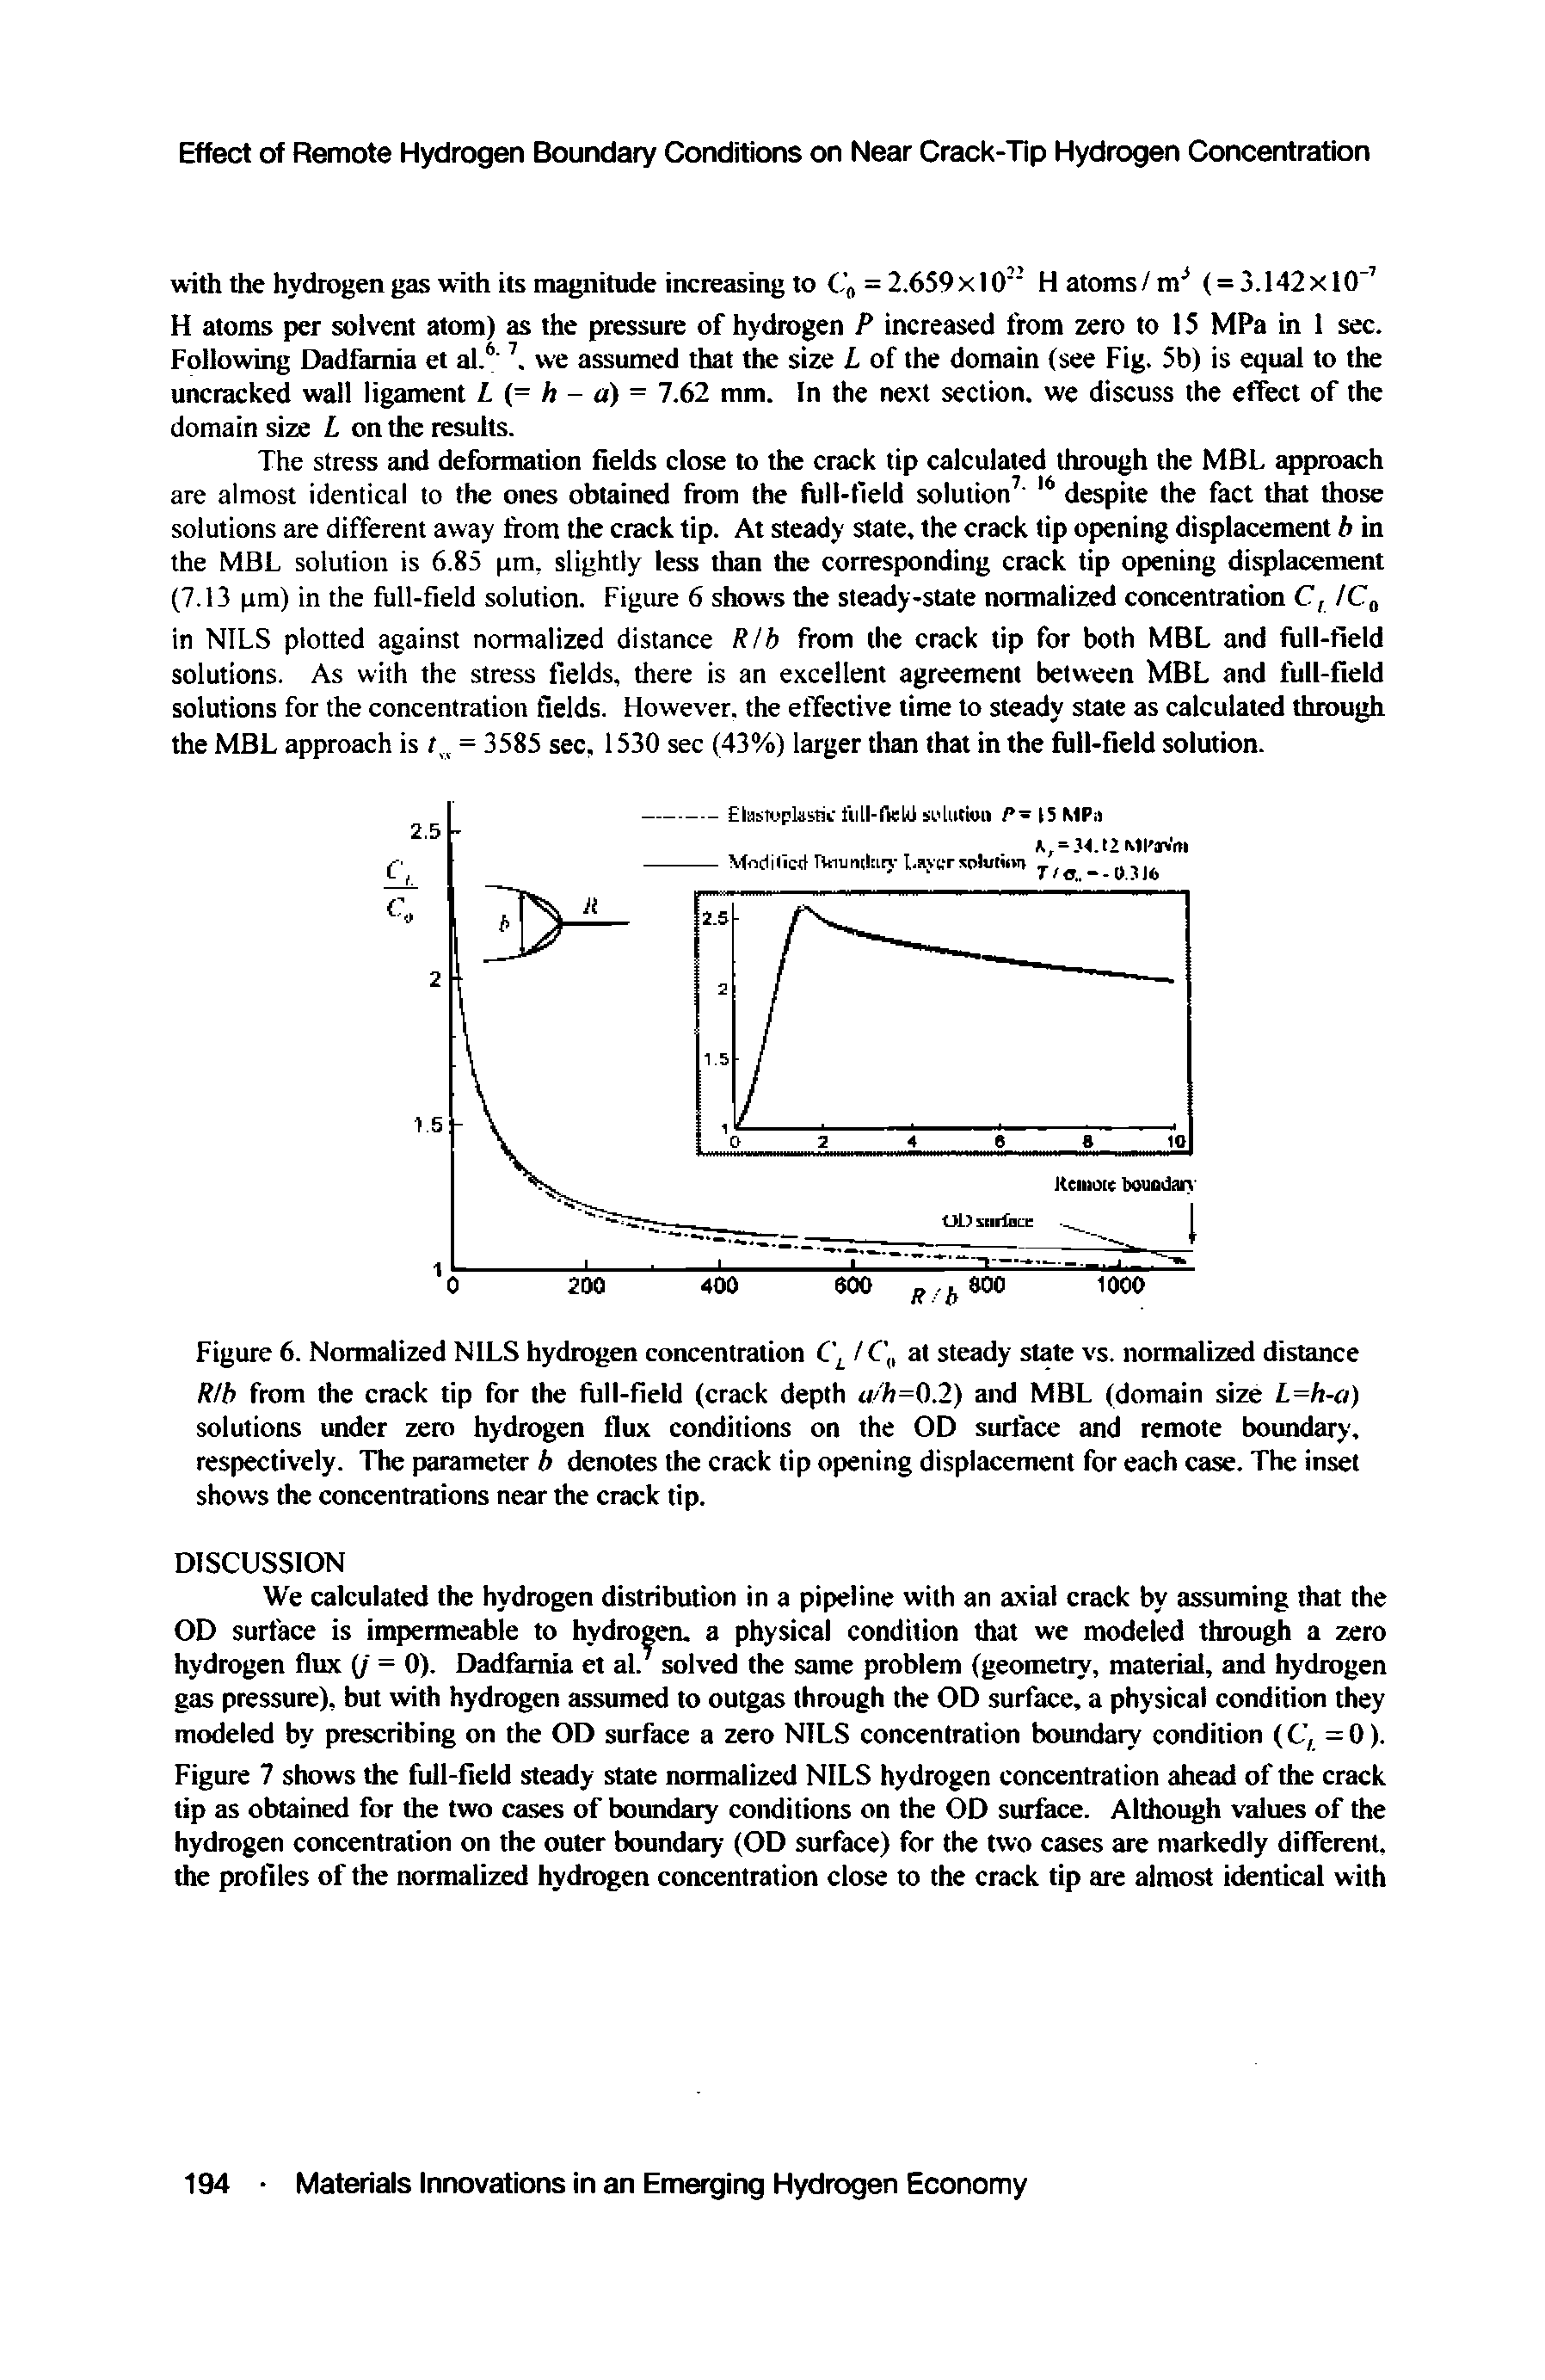 Figure 6. Normalized NILS hydrogen concentration CL / C at steady state vs. normalized distance R/b from the crack tip for the full-field (crack depth wh=0.2) and MBL (domain size L=h-a) solutions under zero hydrogen flux conditions on the OD surface and remote boundary, respectively. The parameter b denotes the crack tip opening displacement for each case. The inset shows the concentrations near the crack tip.